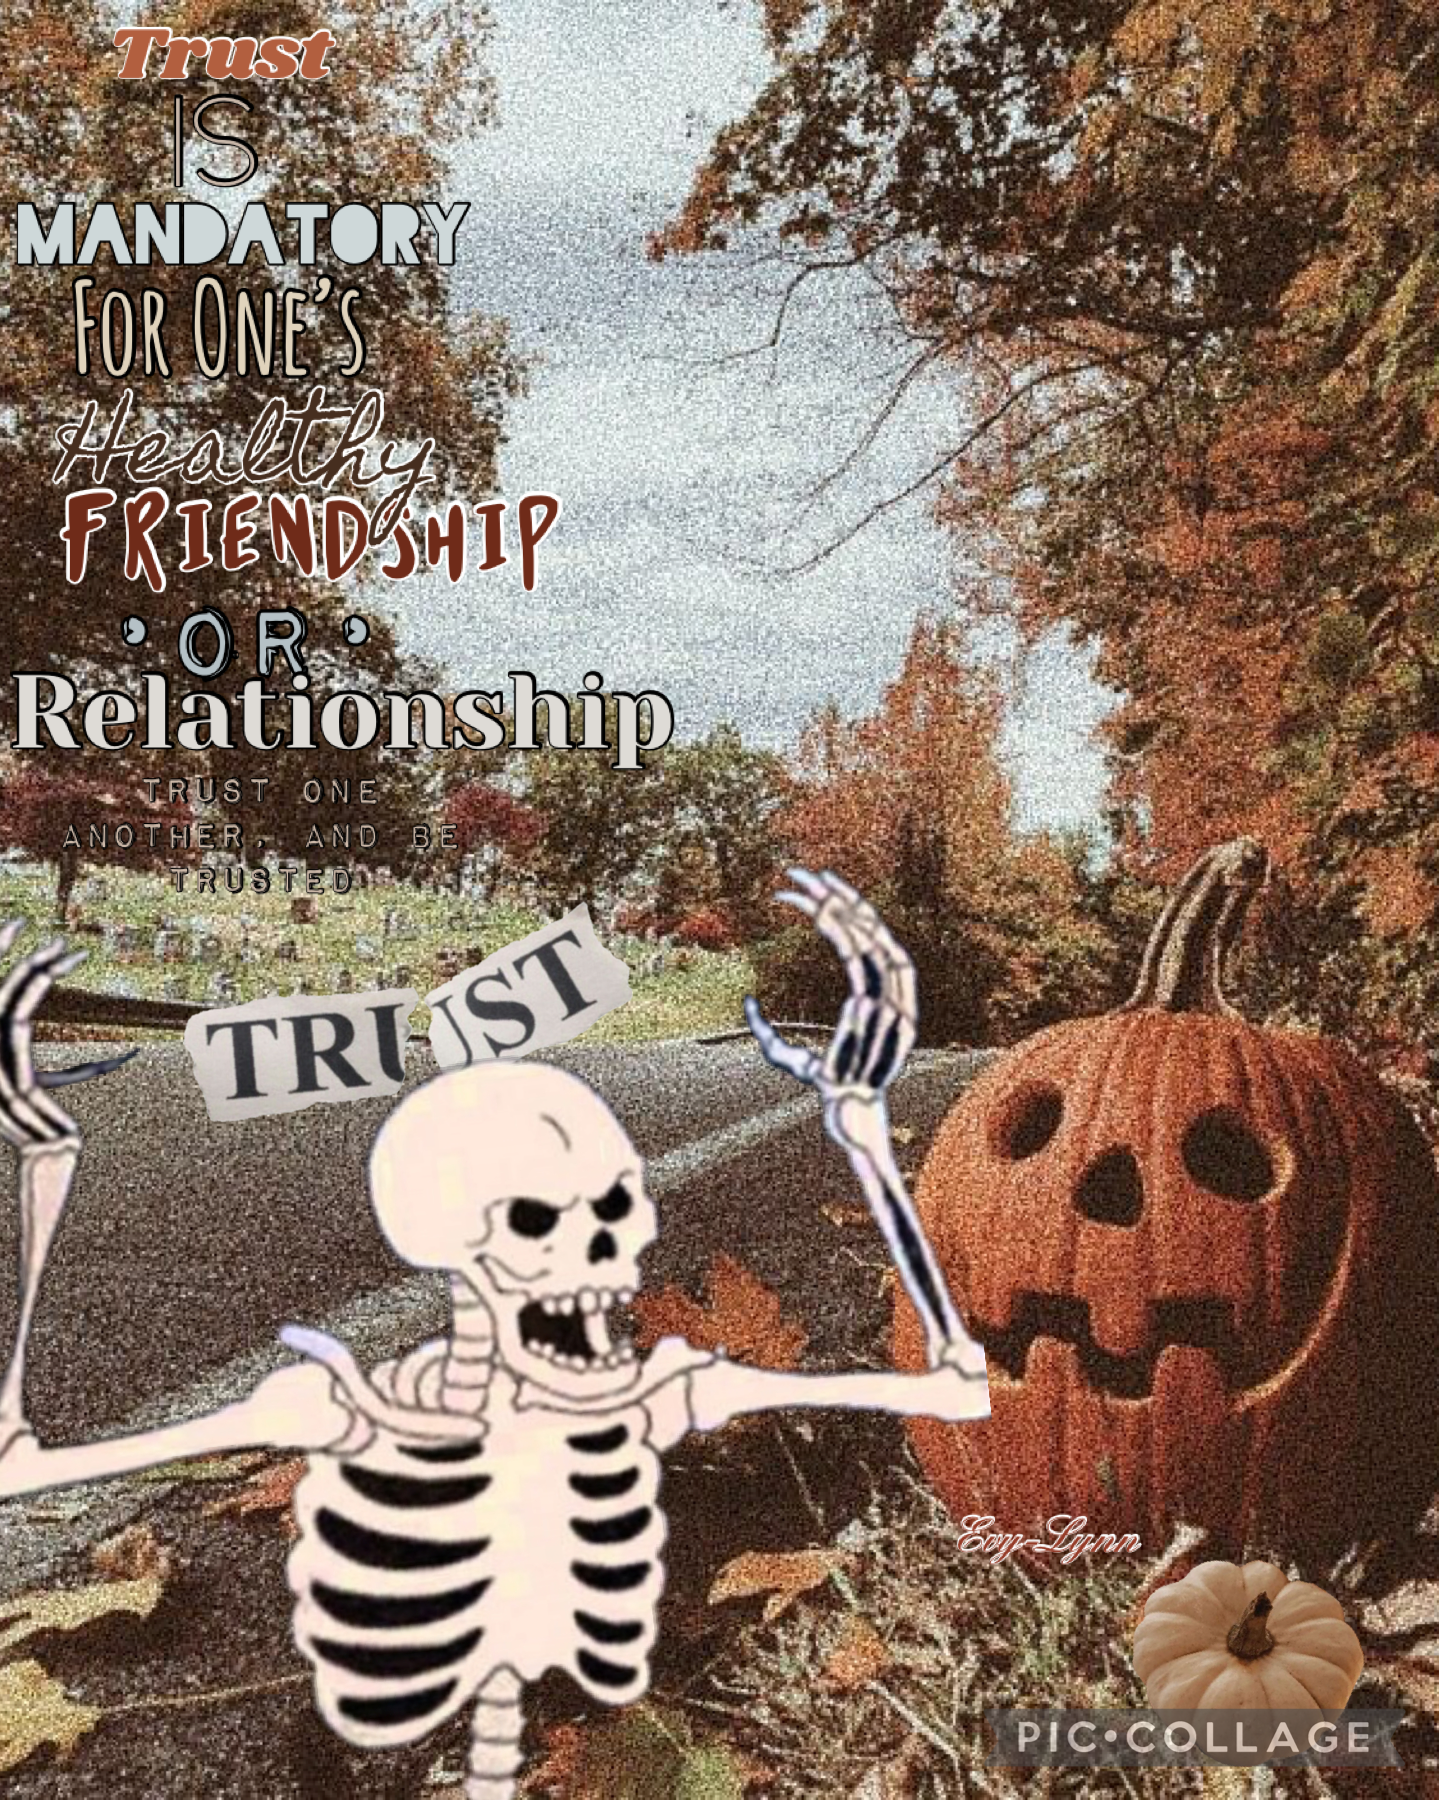  🎃Happy fall Y’all!🎃 
Remember that no good relationship can last without trust🧡 Trust one another! Be trustworthy! Also, what are you gonna be for Halloween? I’m going to be a earth fairy 🧚‍♀️, I’m sewing my own costume this year! I always love to hear y